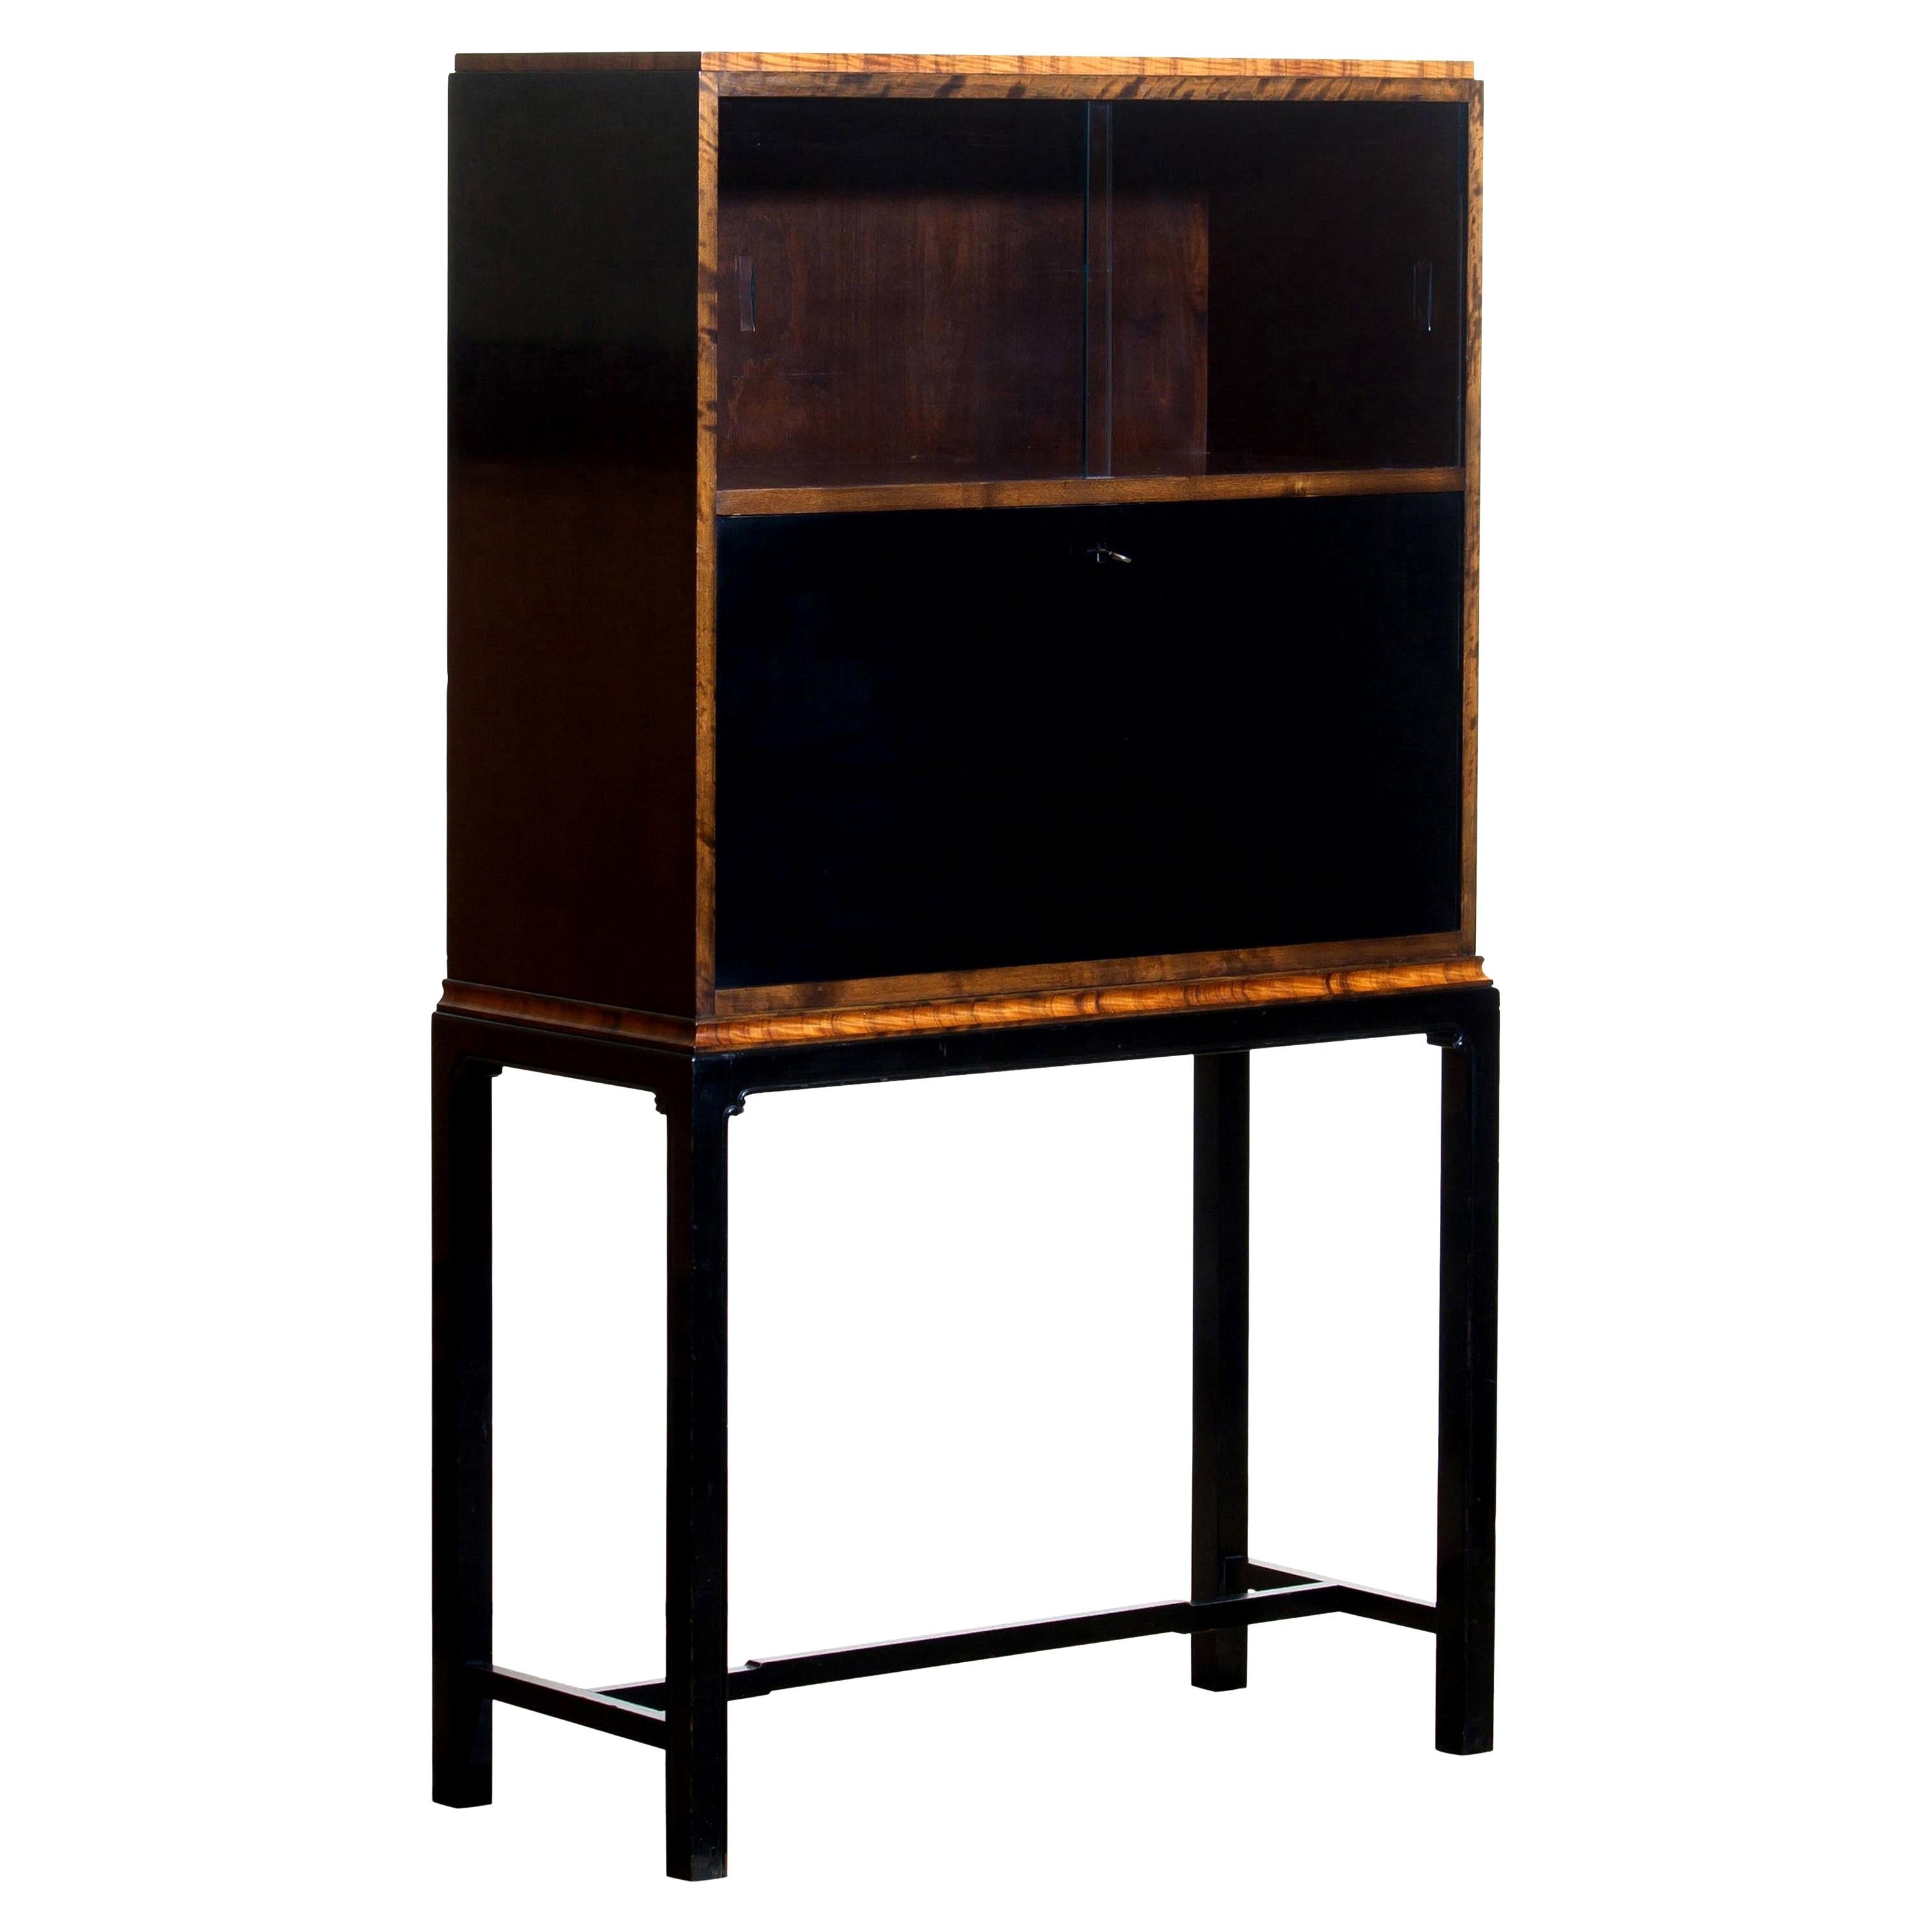 1920s, unique secretaire designed by Axel Einar Hjorth and manufactured in 1924 by Nordiska Kompaniet, numbered L228.
This unique Art Deco secretaire is designed as a come-in to the USA for Nordiska Kompaniet.

The secretaire is veneered with